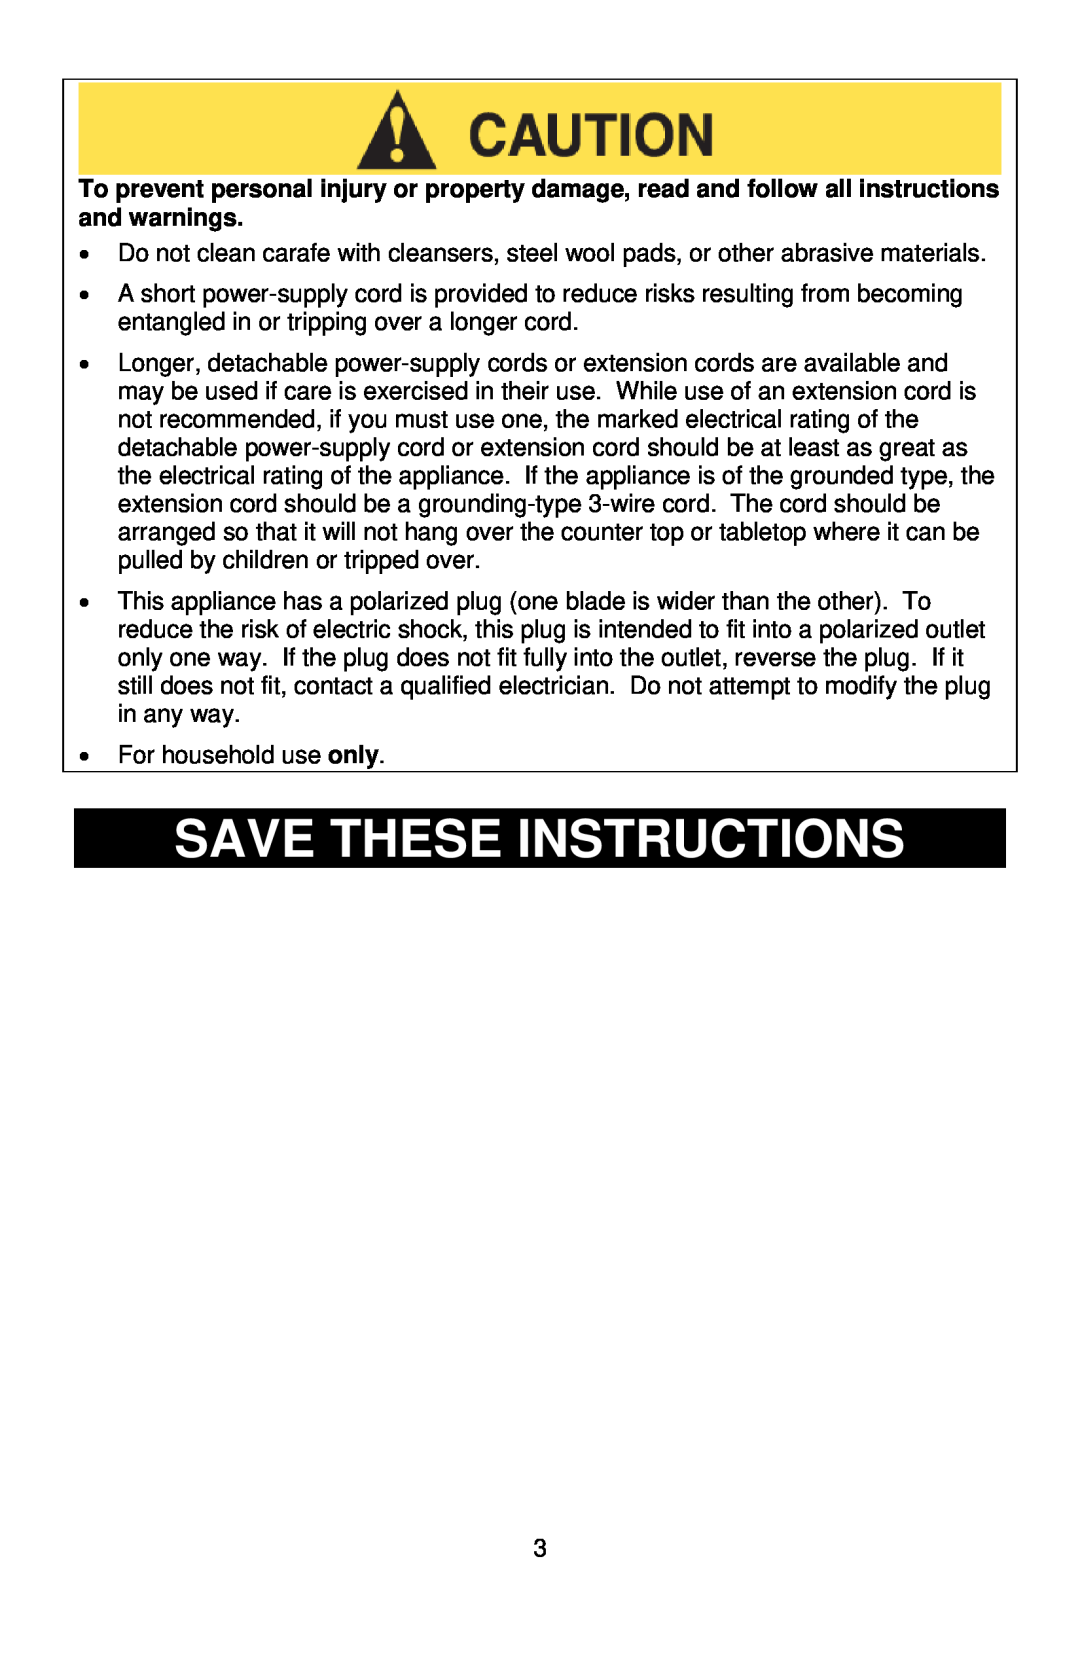 West Bend L5732, SHCM100 instruction manual Save These Instructions 